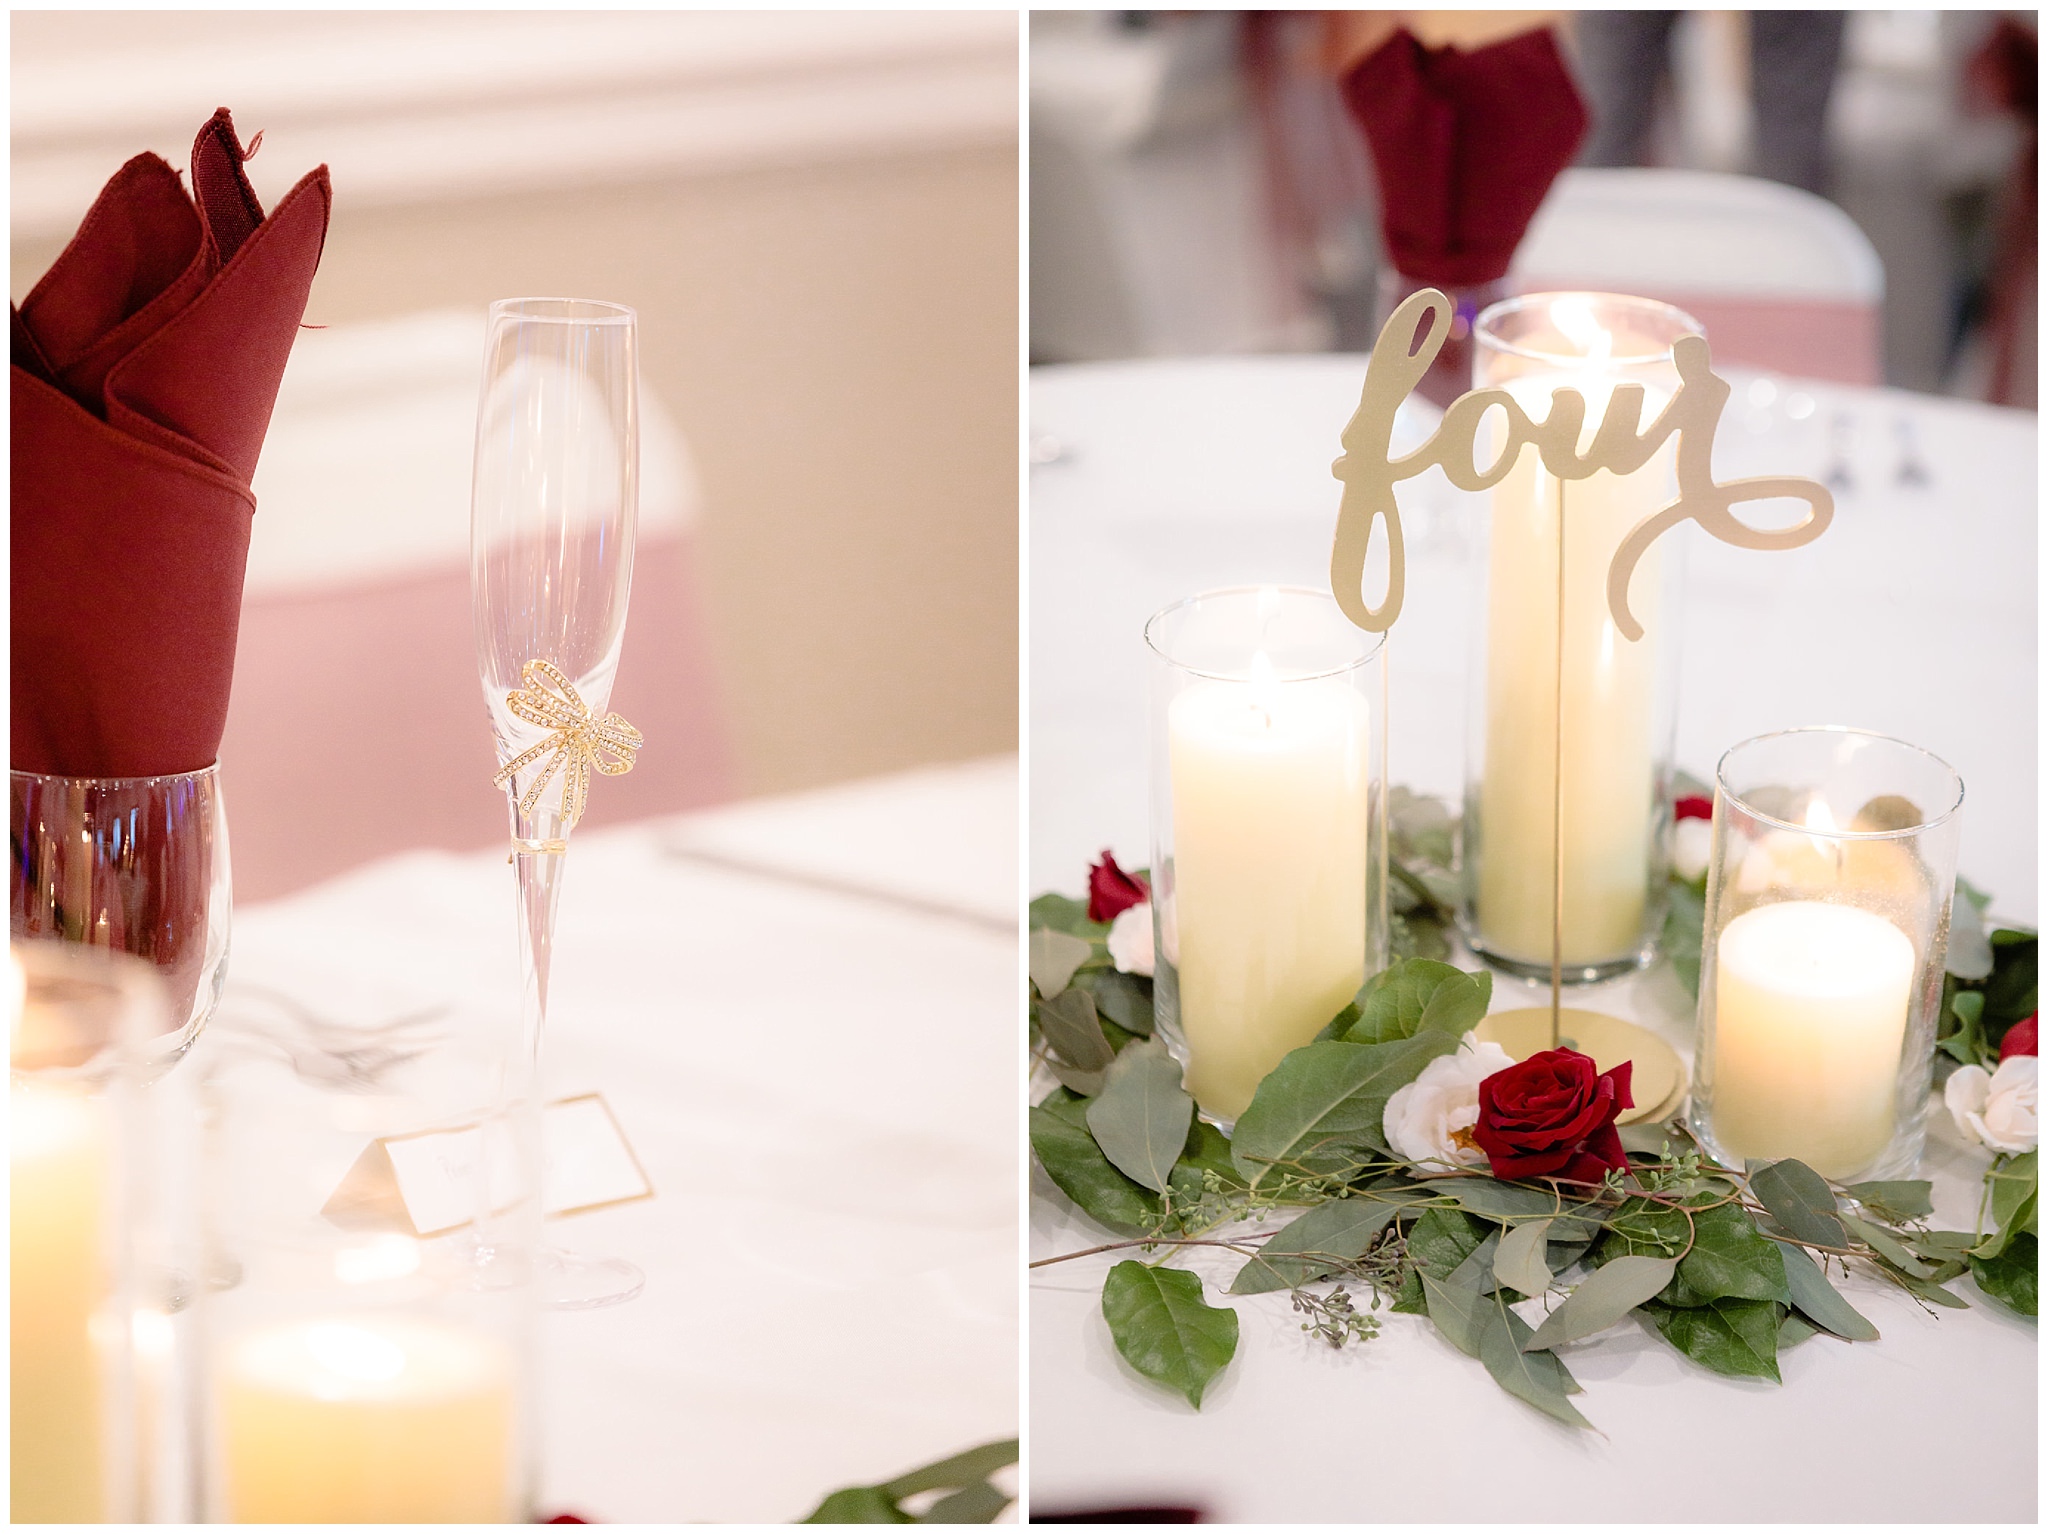 Candle centerpieces at a Riverside Landing wedding